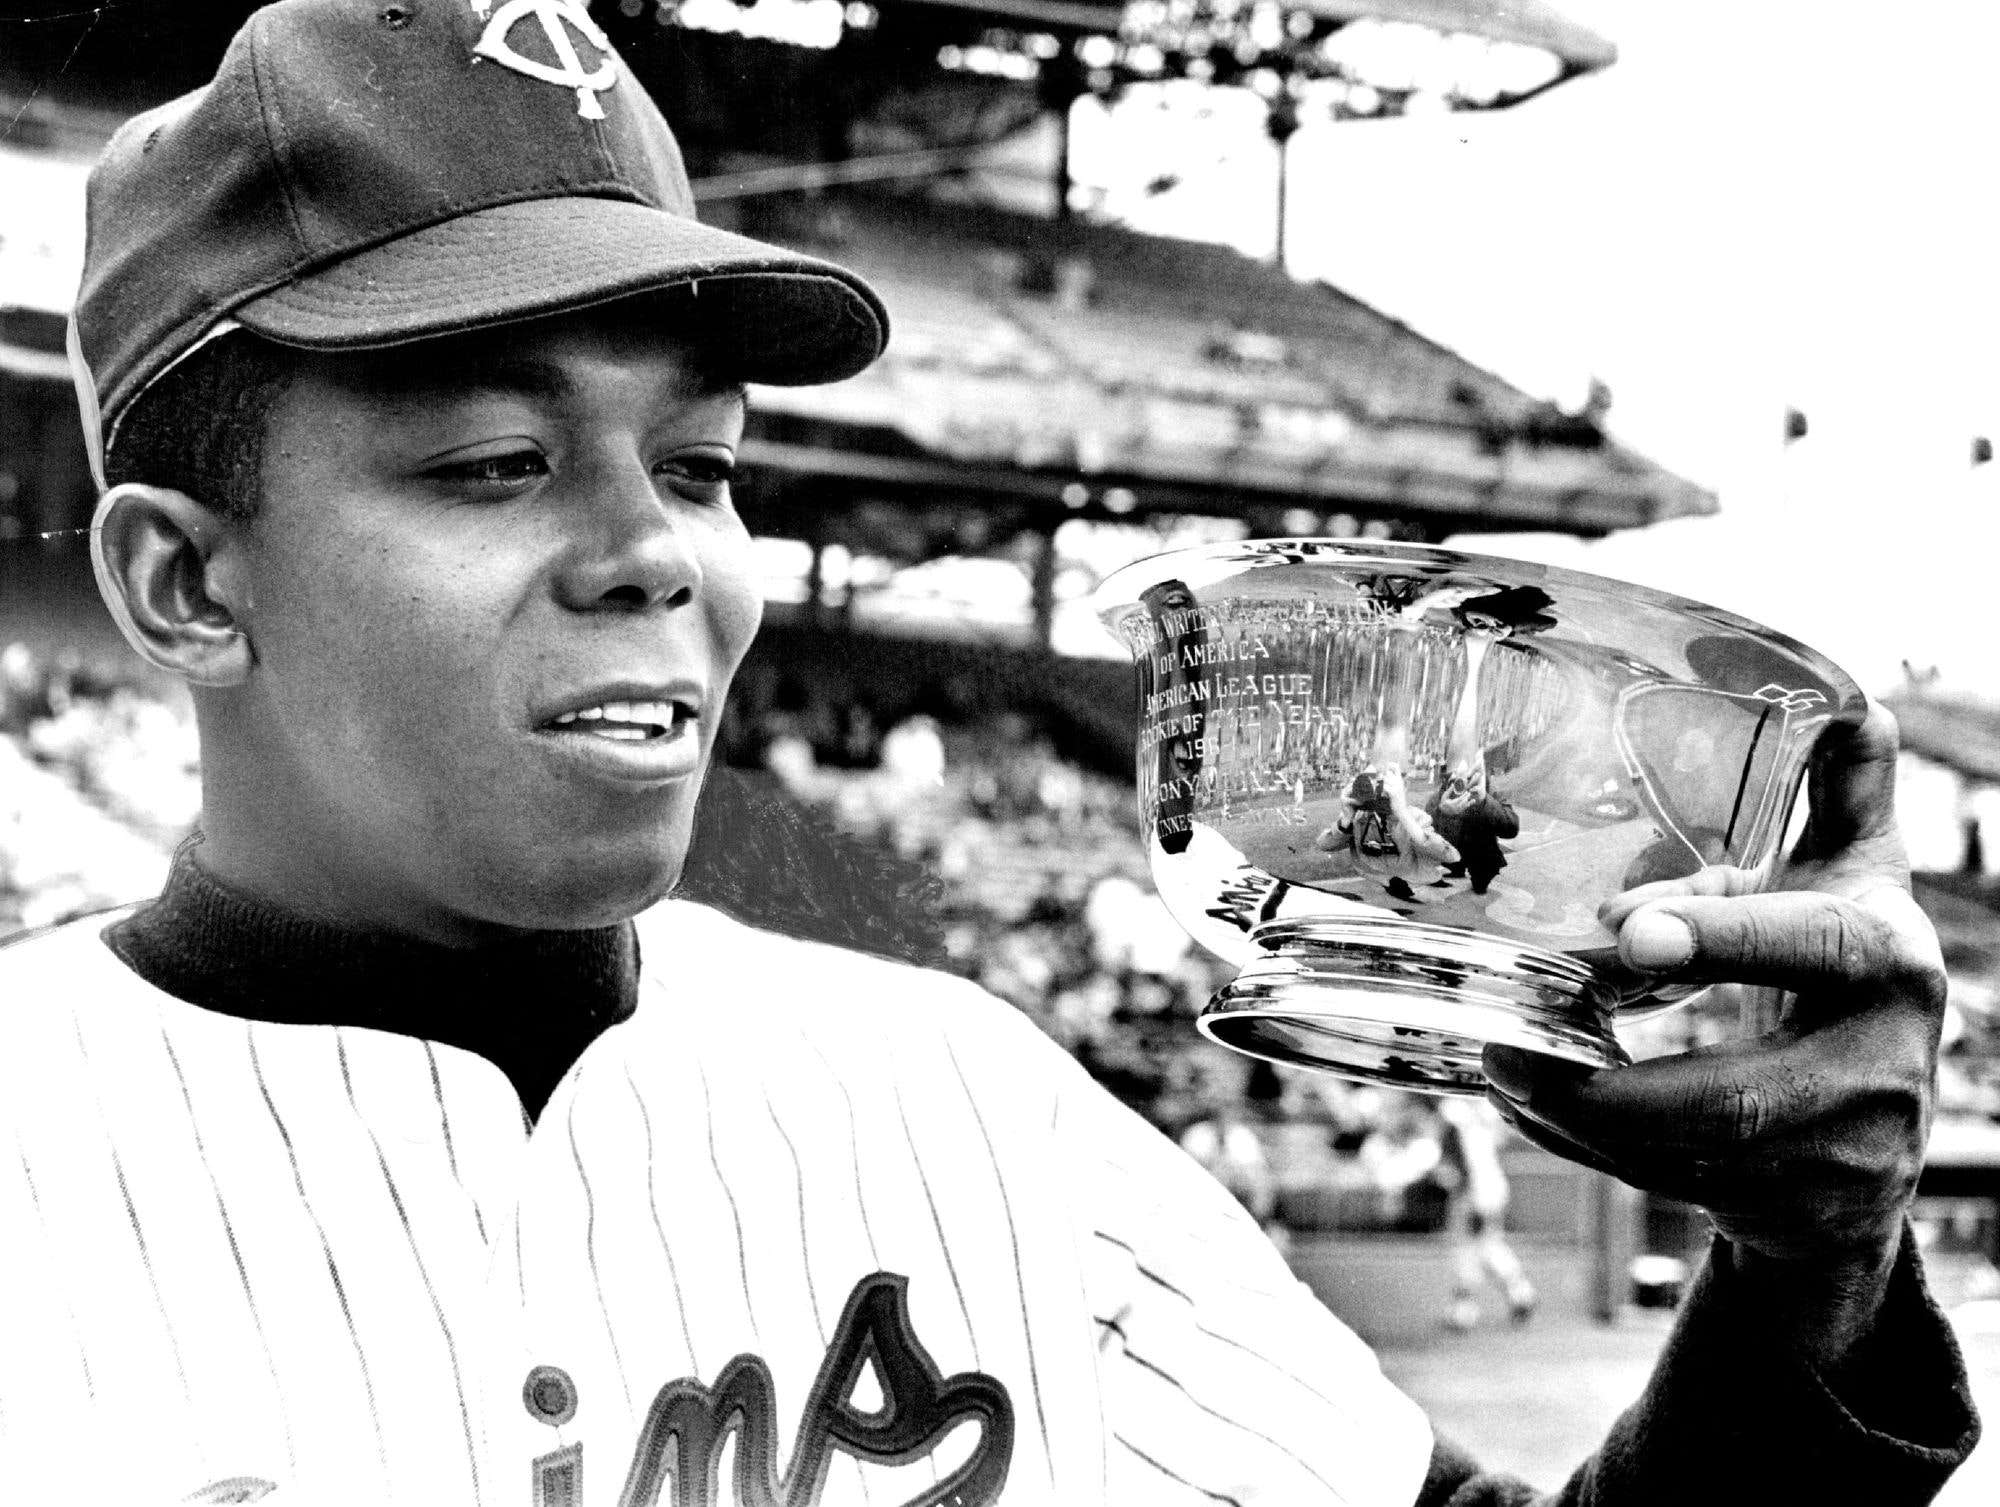 Tony Oliva was elected on December 5 to the Cooperstown Hall of Fame. Photo: Taken from Star Tribune.